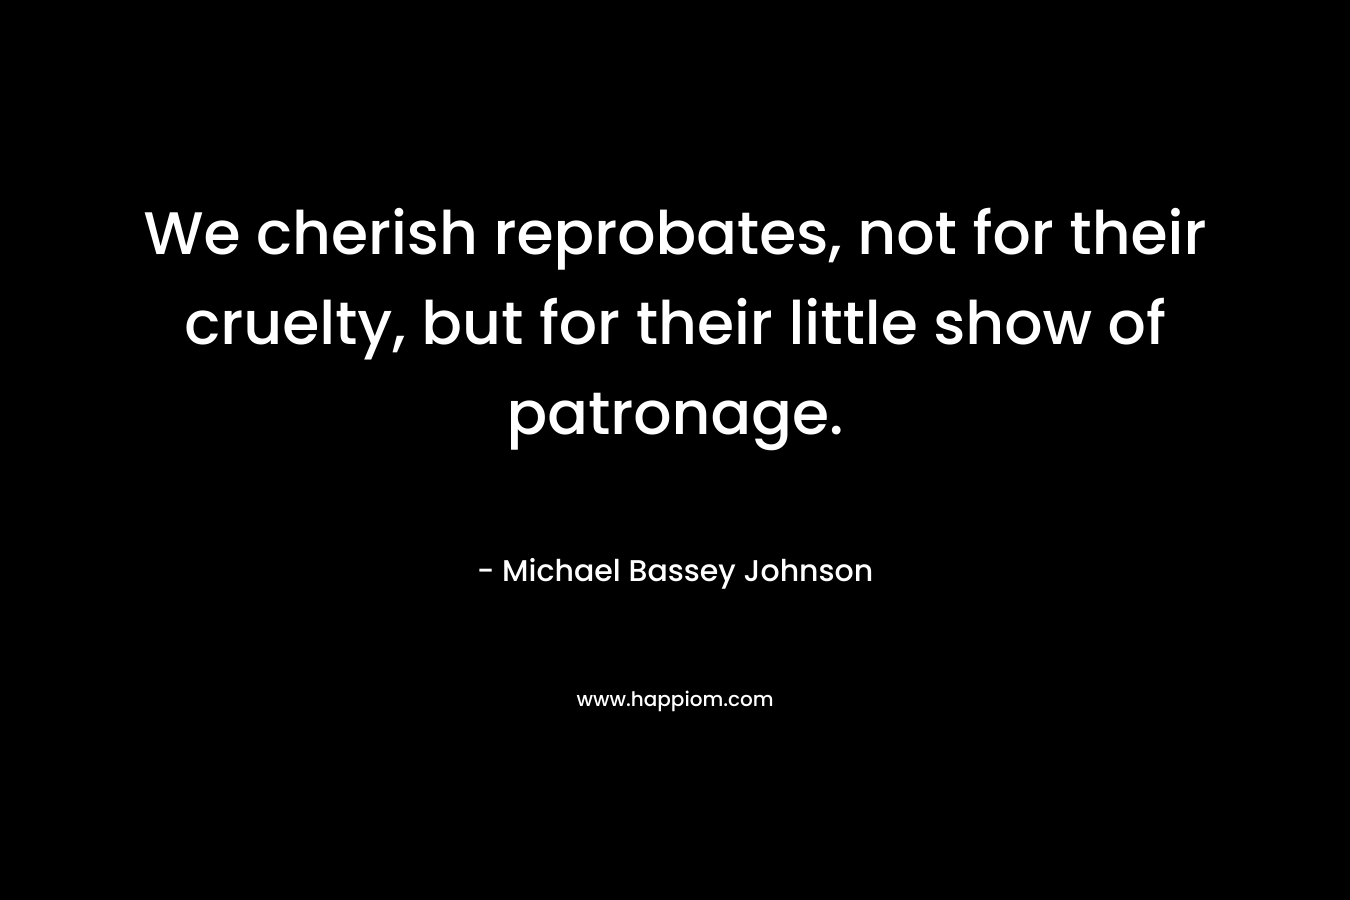 We cherish reprobates, not for their cruelty, but for their little show of patronage. – Michael Bassey Johnson